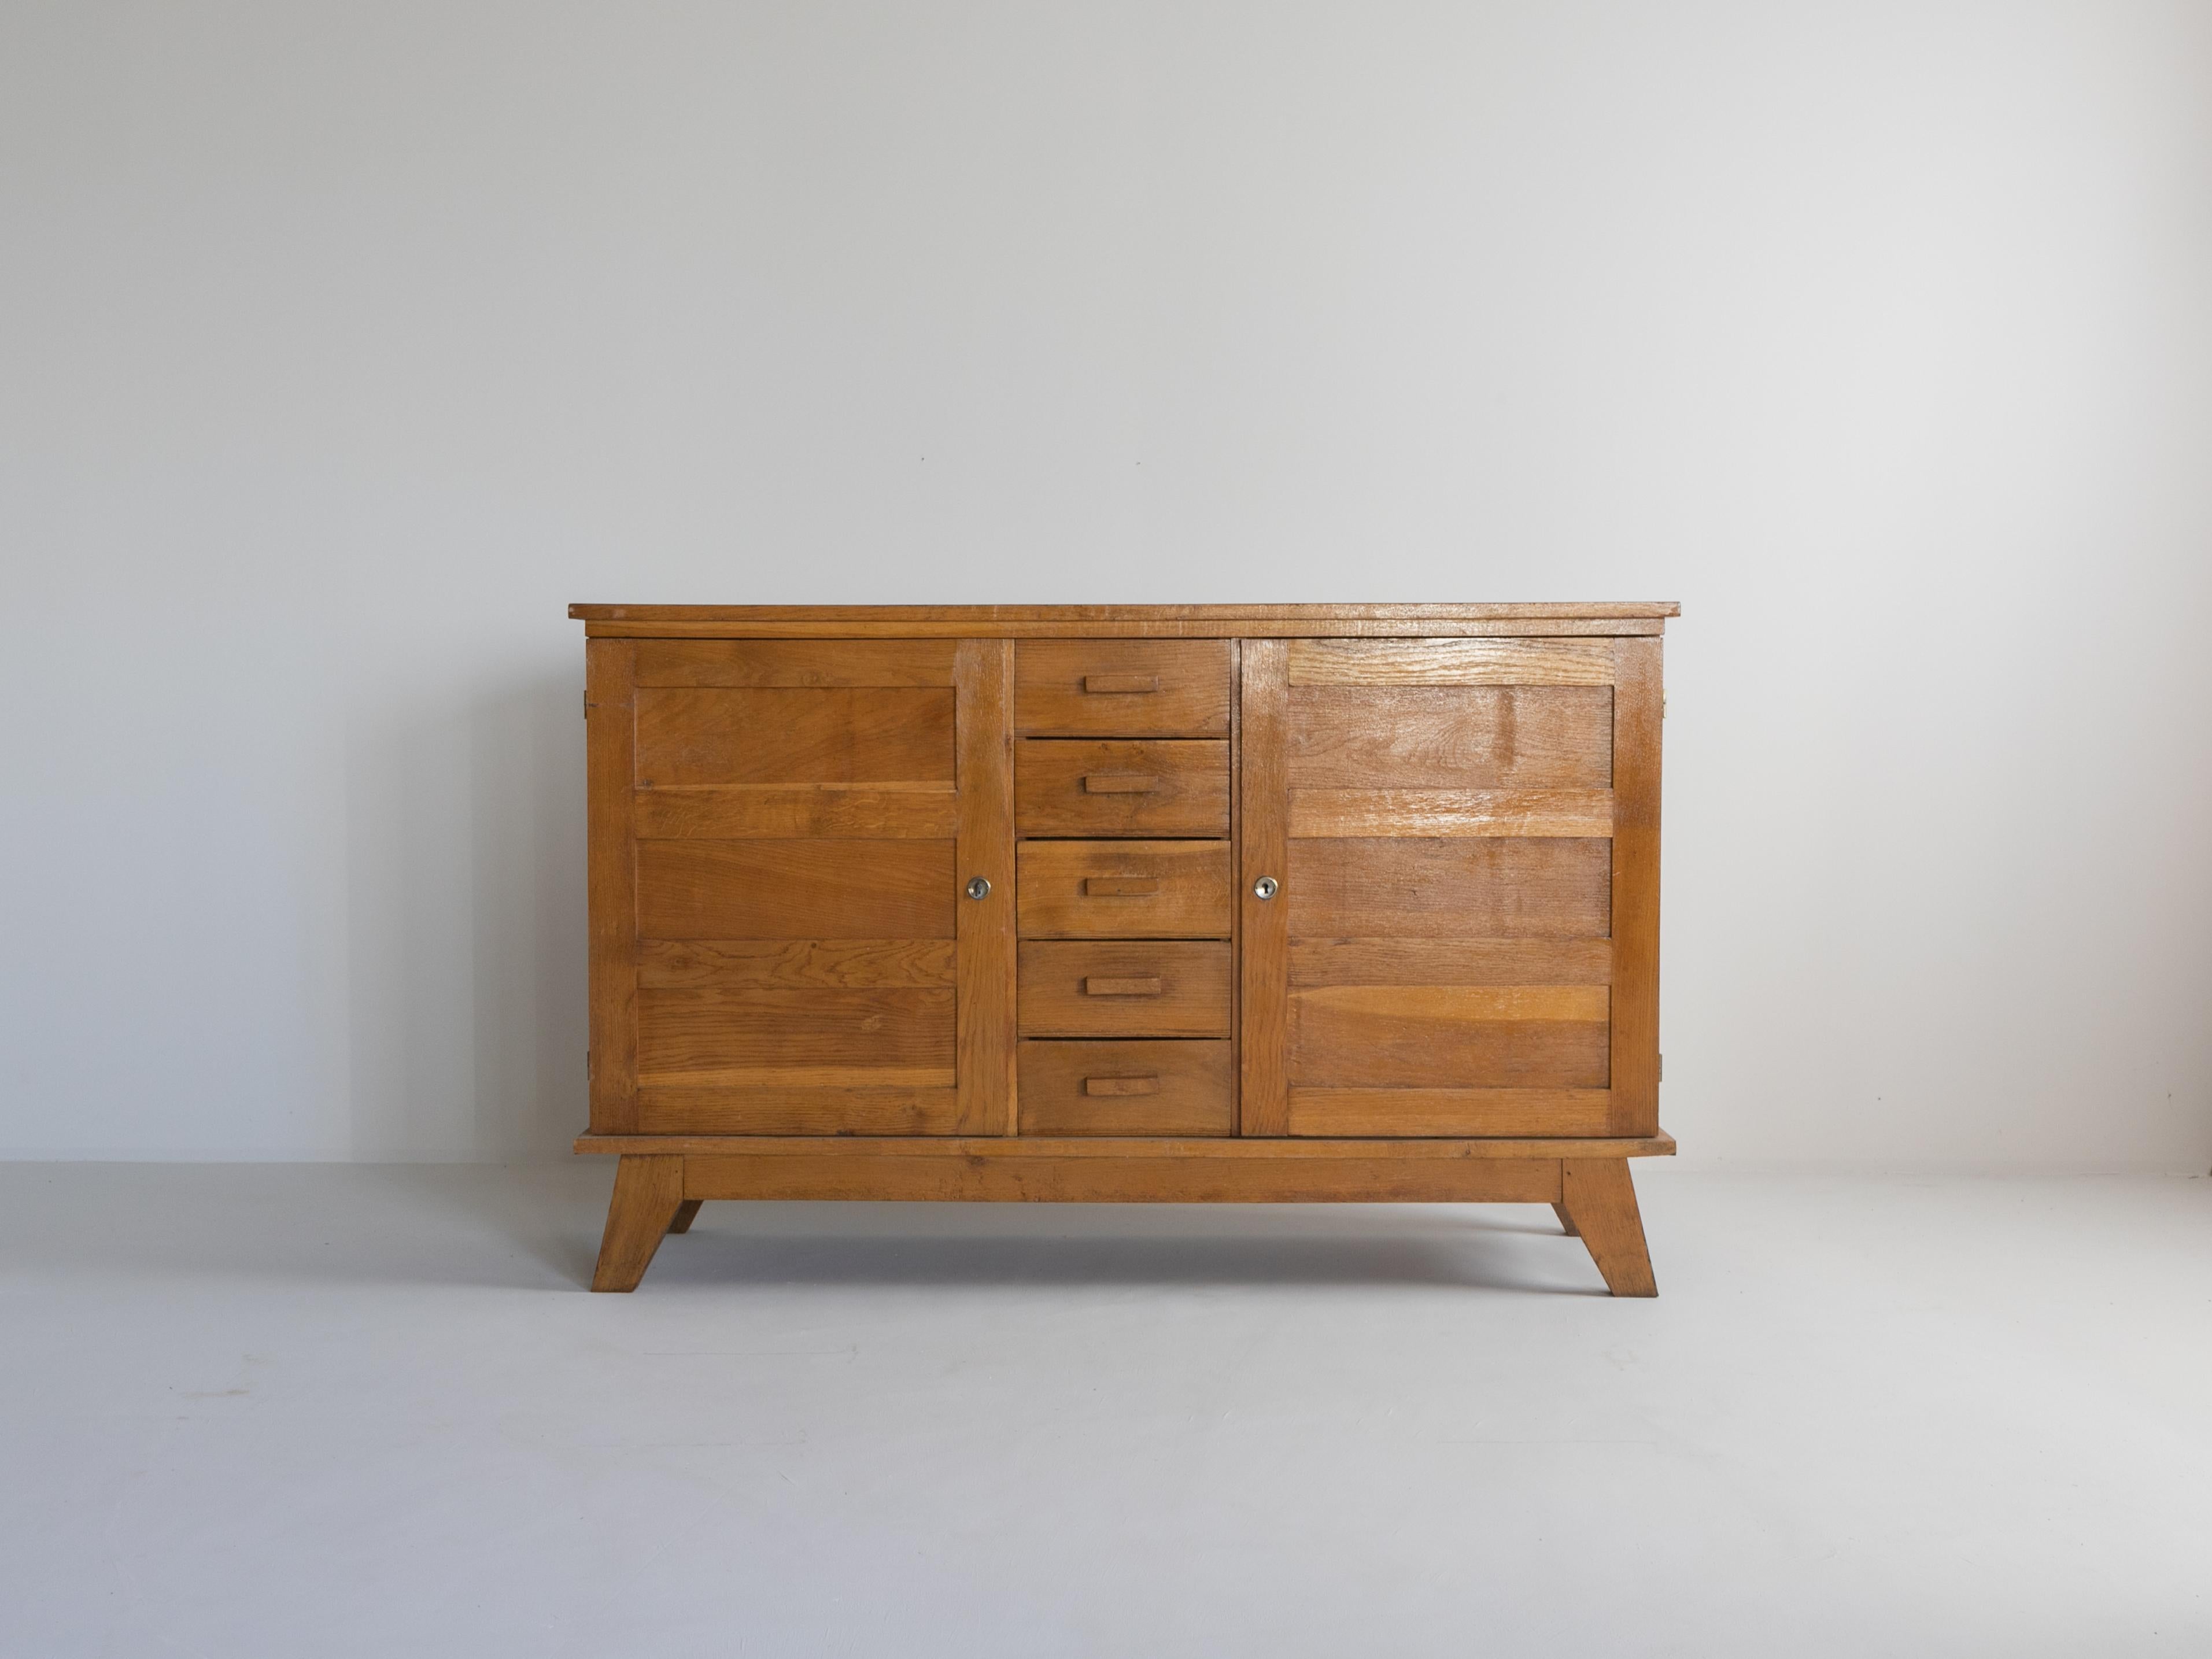 Mobilier d'urgence type v.150 by Rene Gabriel

The 'Mobilier d'urgence type v.150' is a cabinet designed by French designer René Gabriel, part of a series of emergency furniture created as part of the reconstruction programme for the WWII-affected